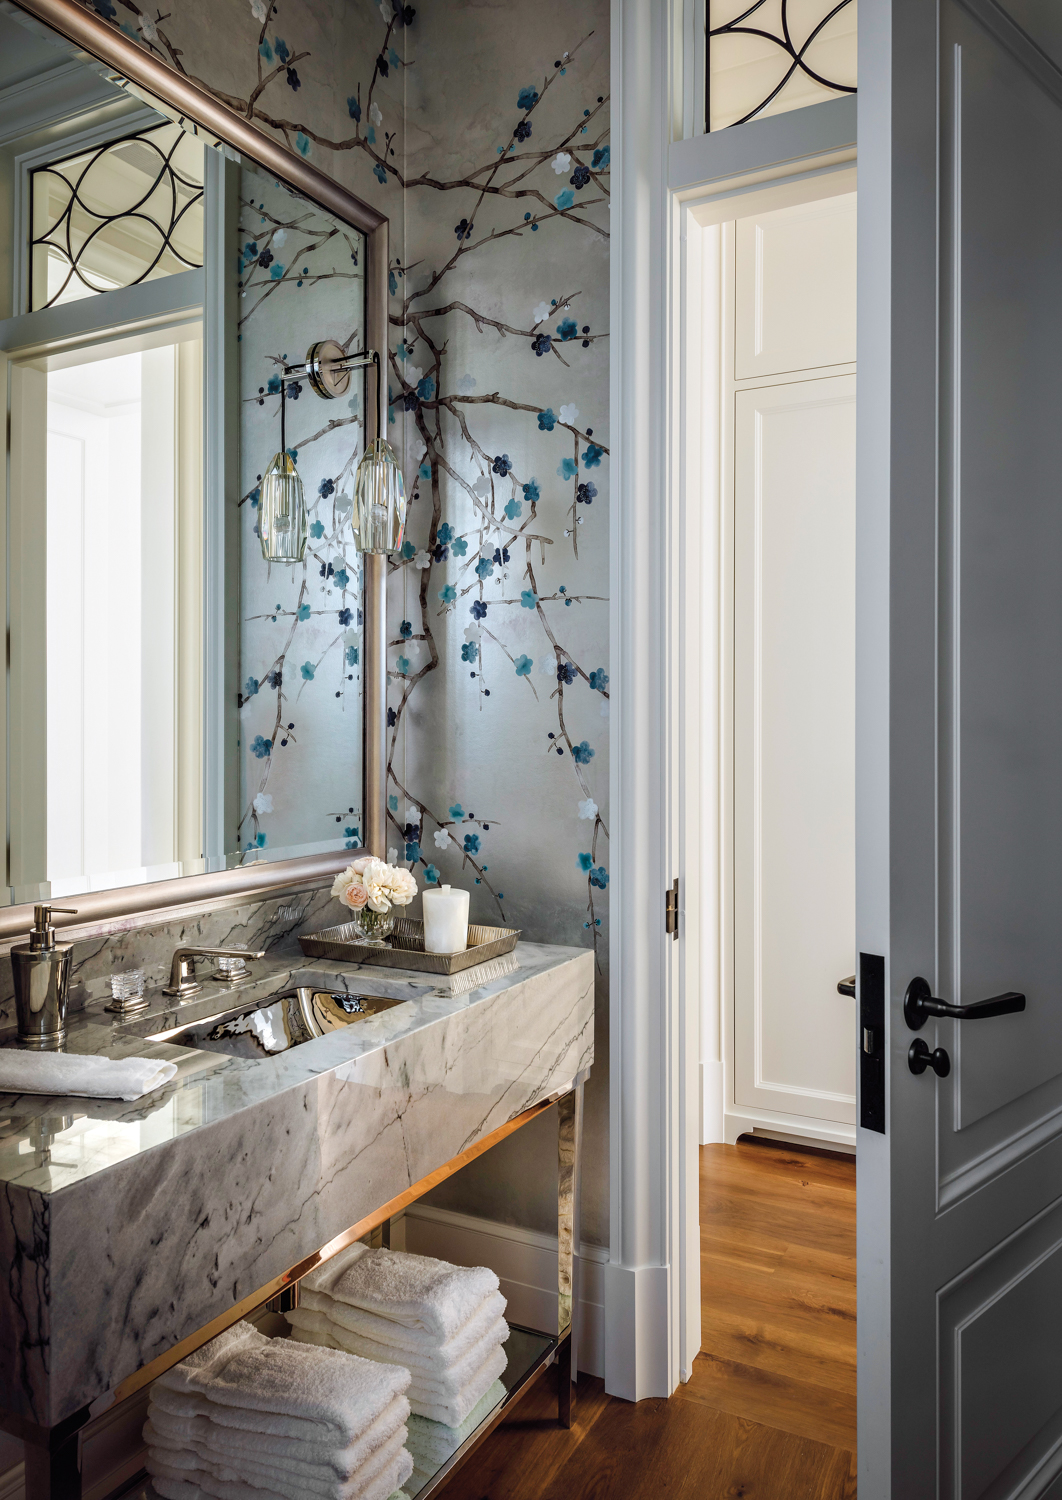 A powder room features metallic...